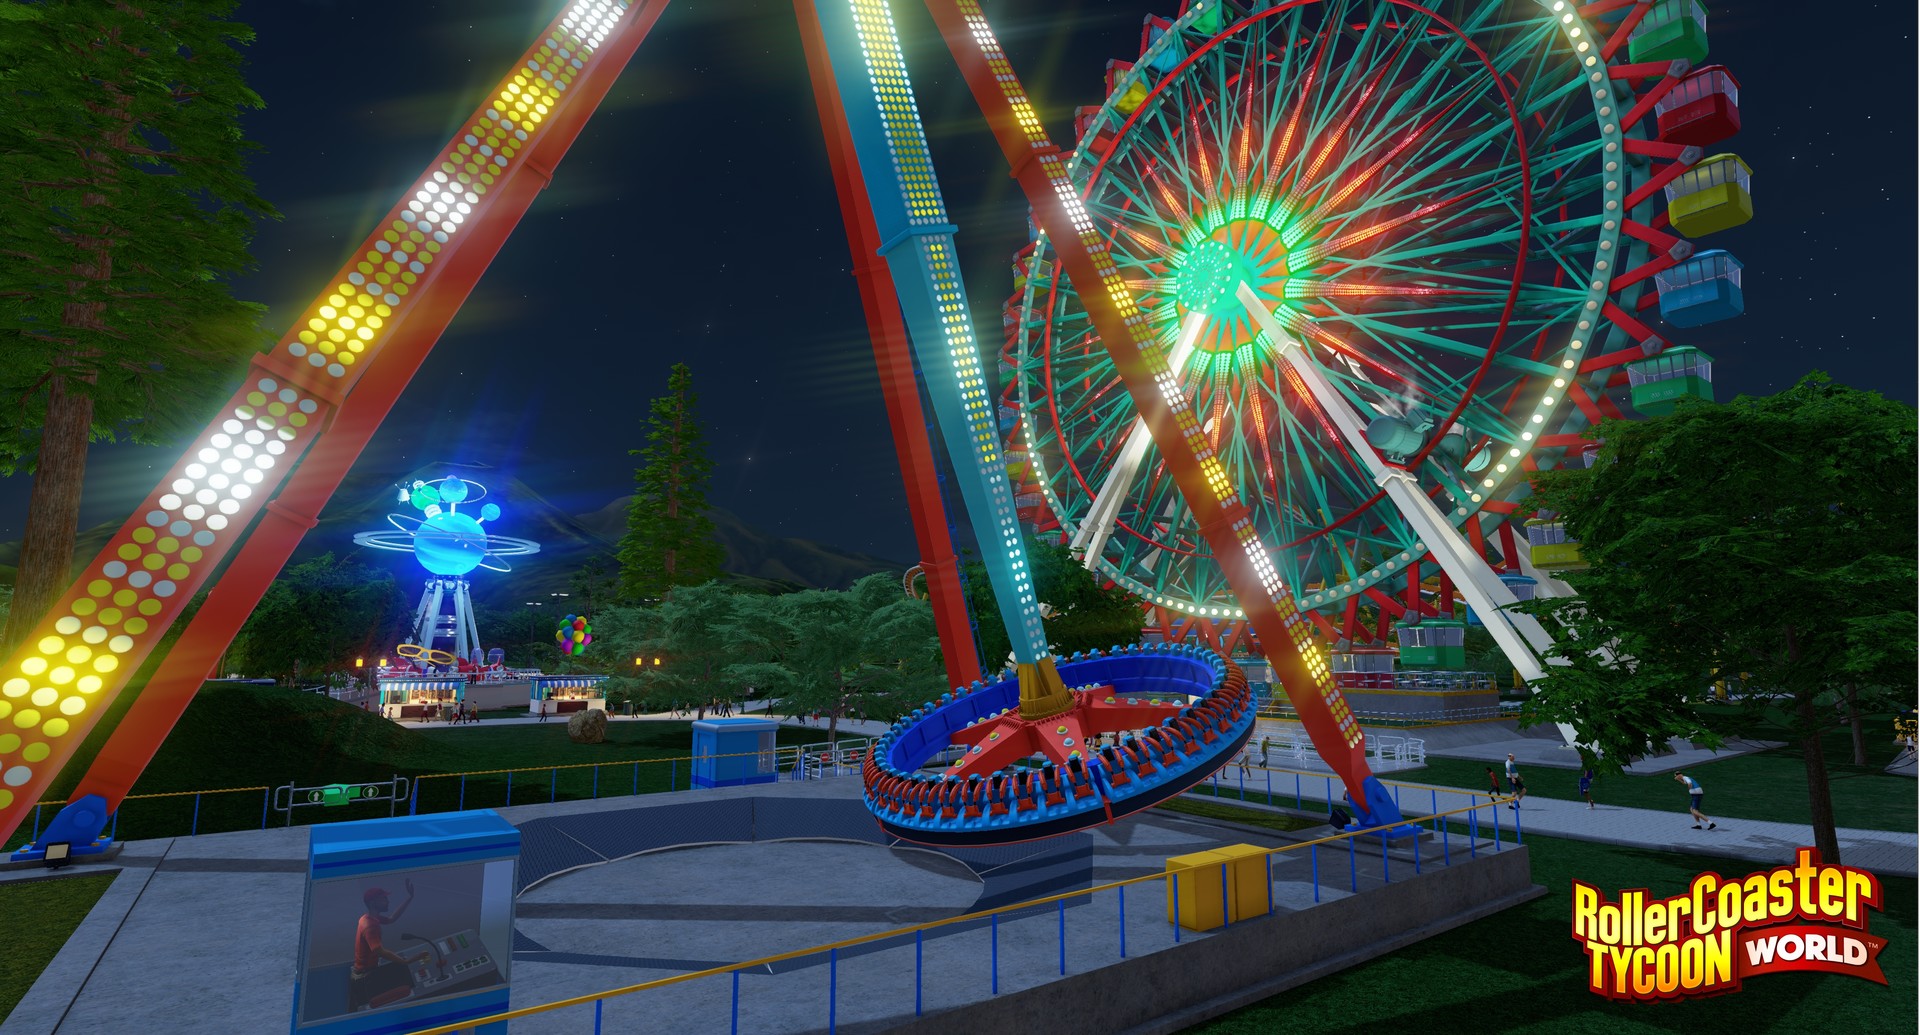 Buy - RollerCoaster Tycoon - The Ultimate Theme park Sim